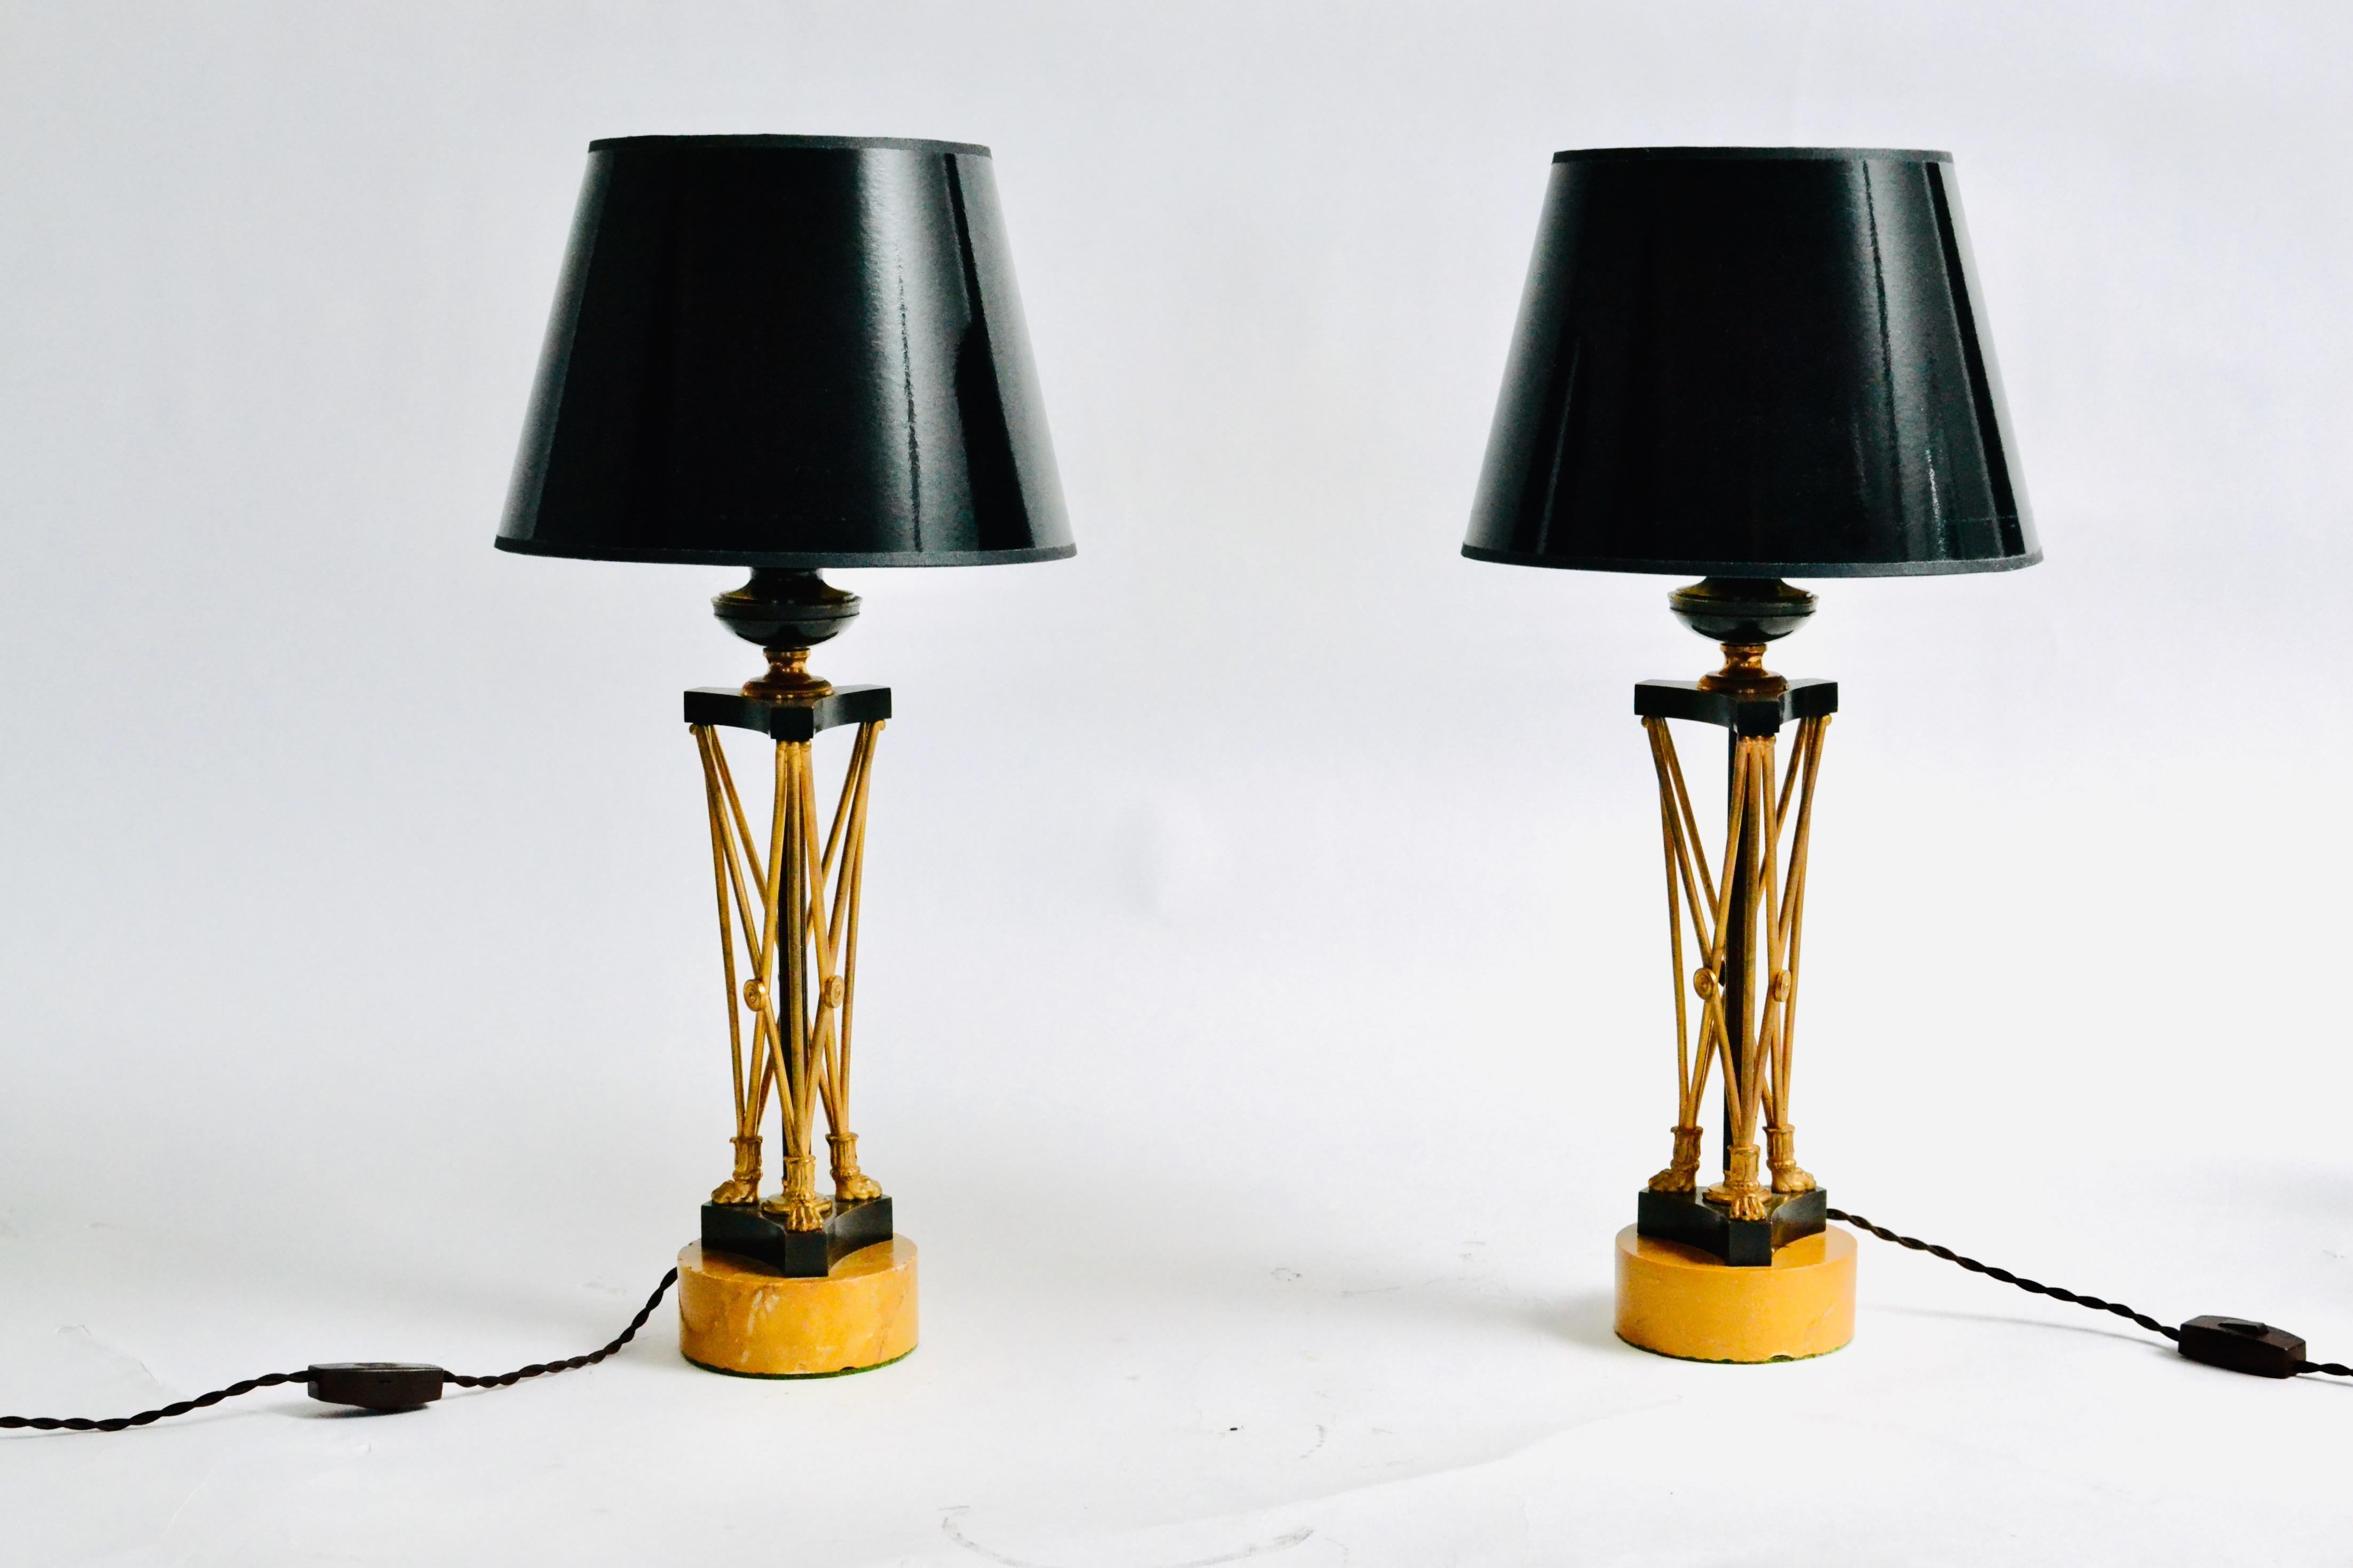 A pair of Regency gilt and patinated bronze candlesticks now mounted as lamps on circular Siena marble bases, early 19th century. Unusual model. 

The Regency era of British history officially spanned the years 1811-1820, though the term is commonly